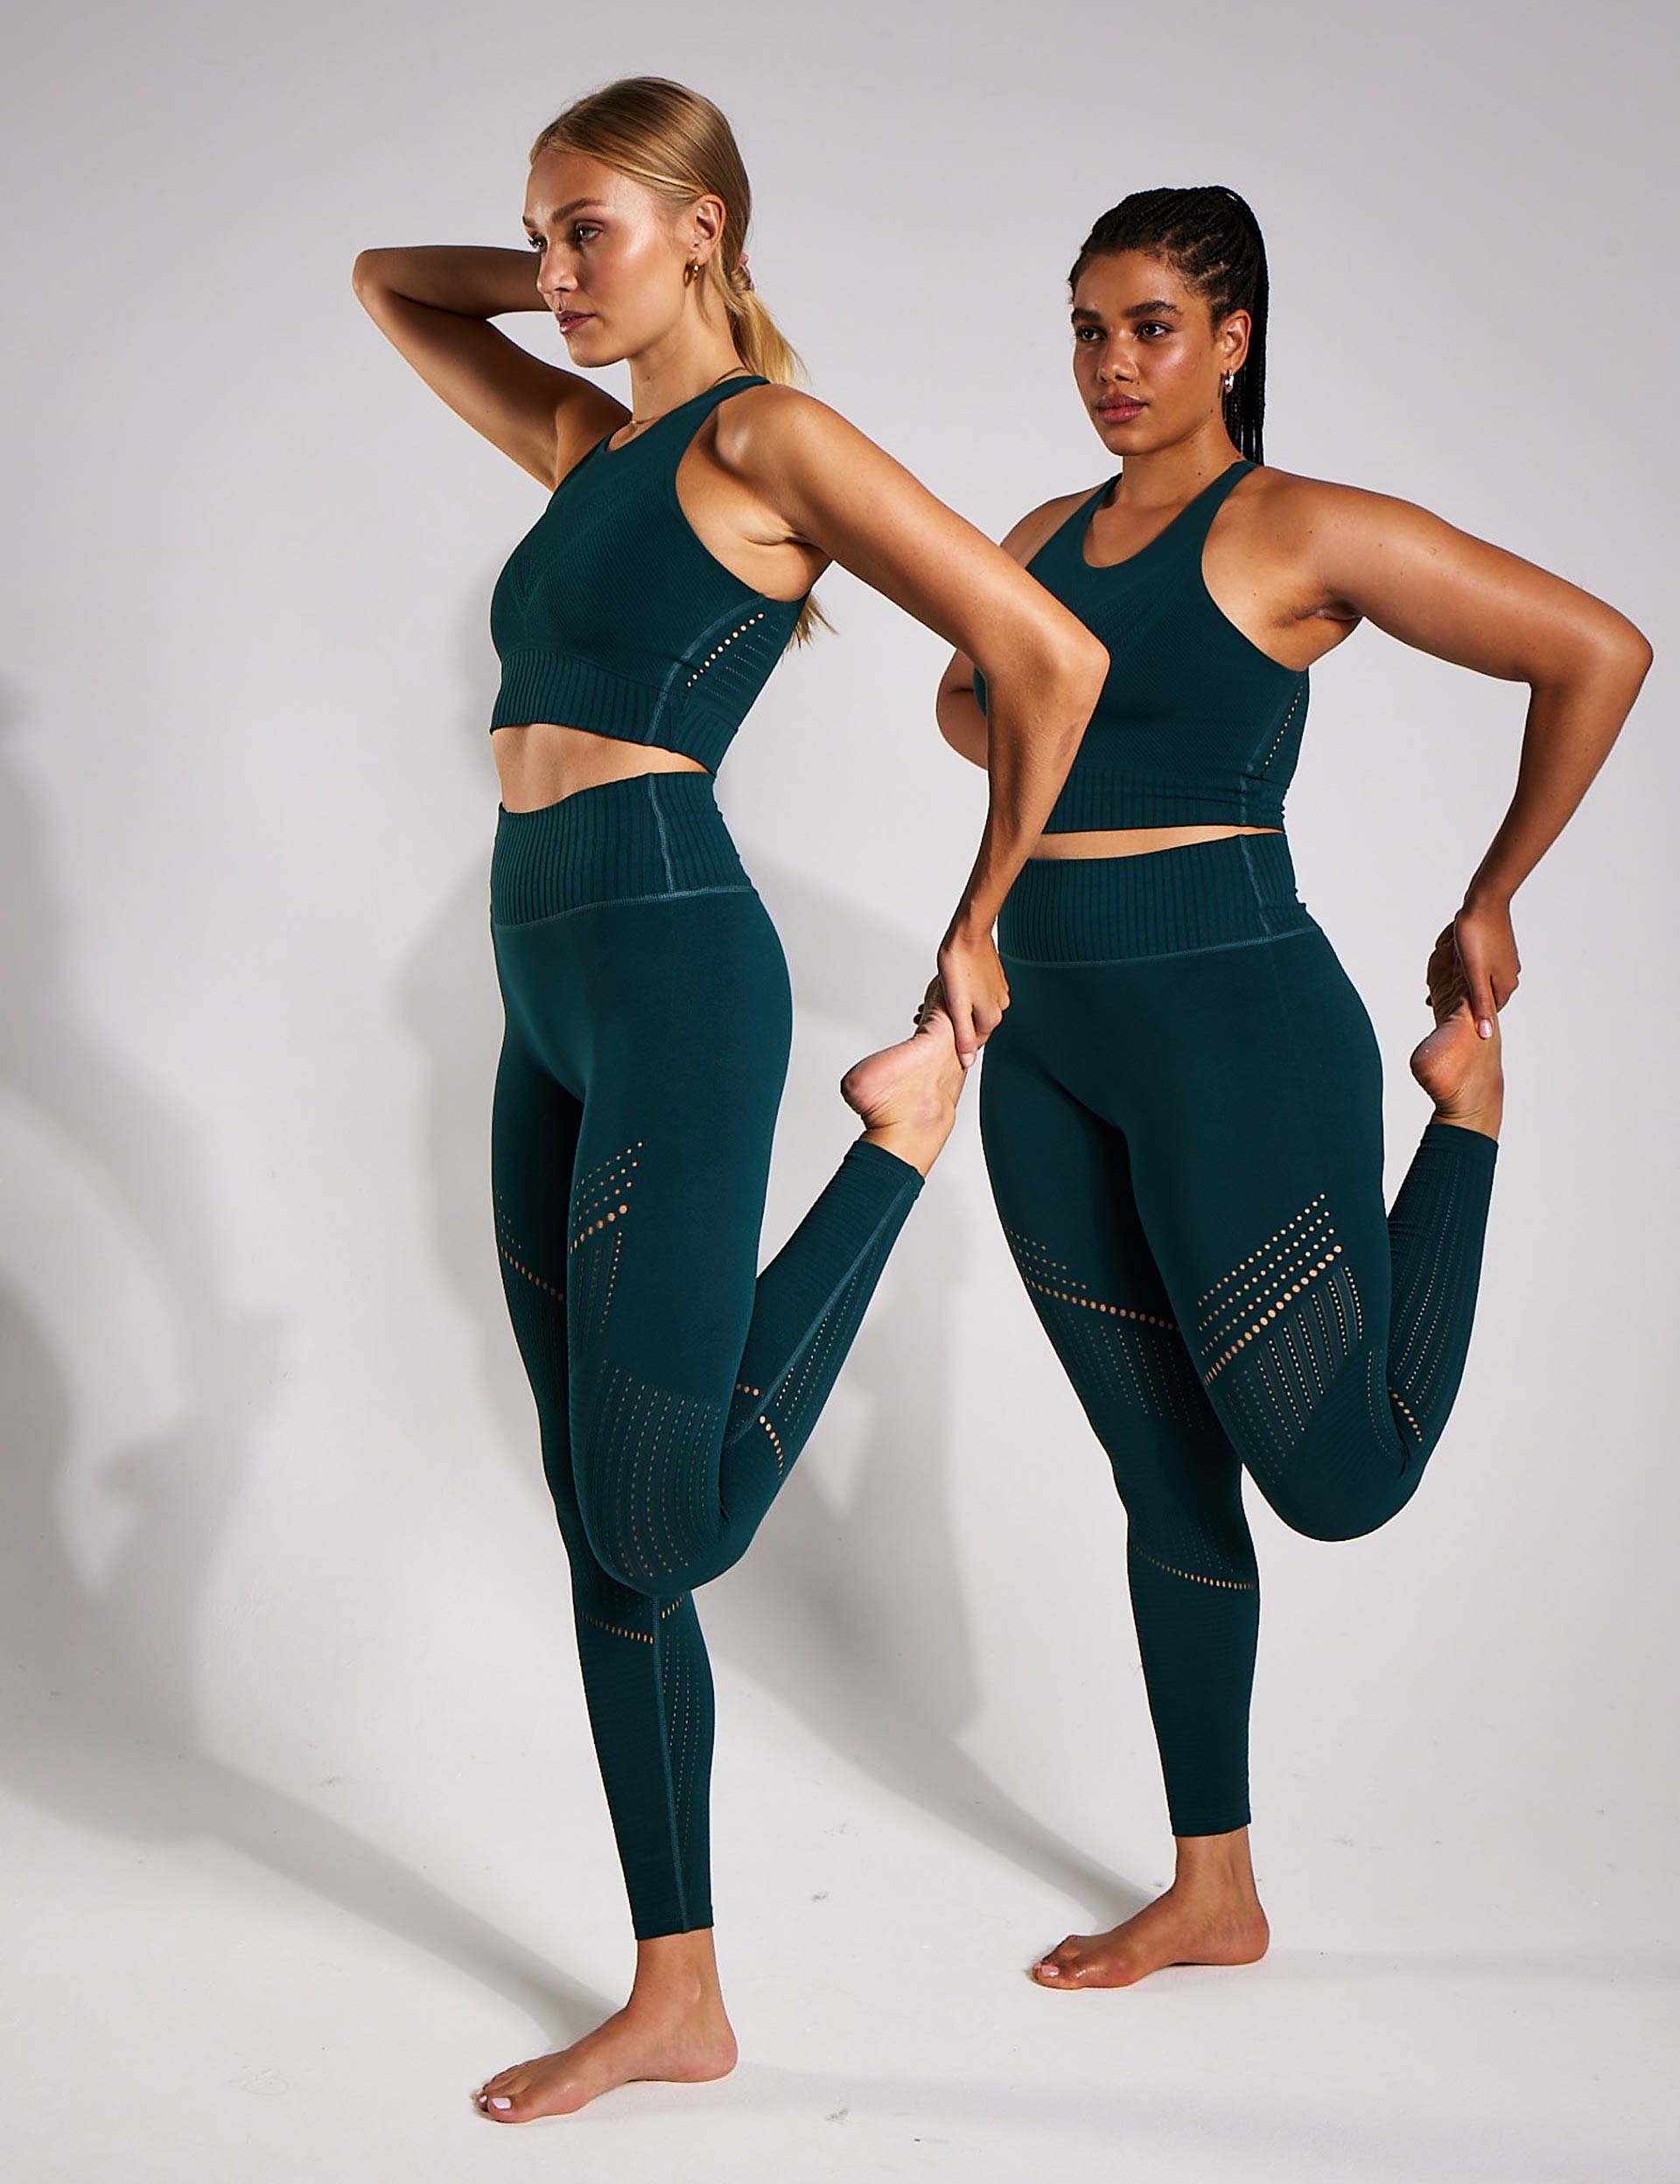 Women's Leggings - Ethically Made. Sweat Society Activewear